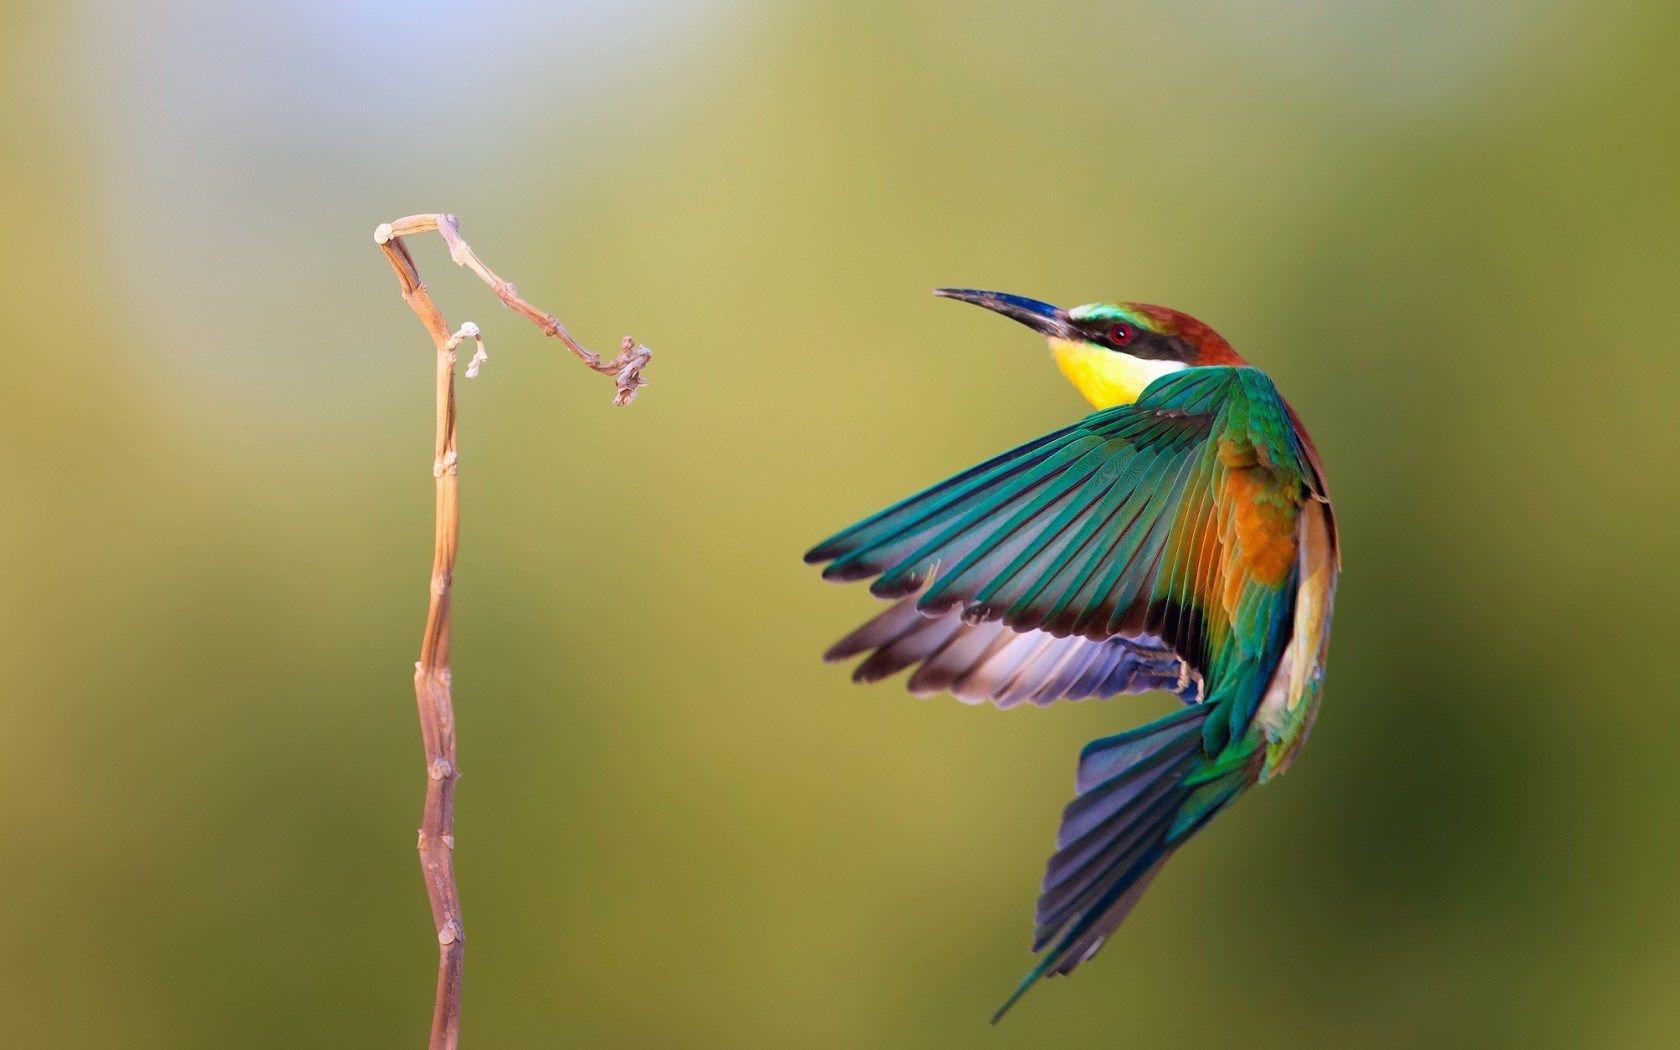 Awesome Bird Wallpaper 41738 1680x1050 px